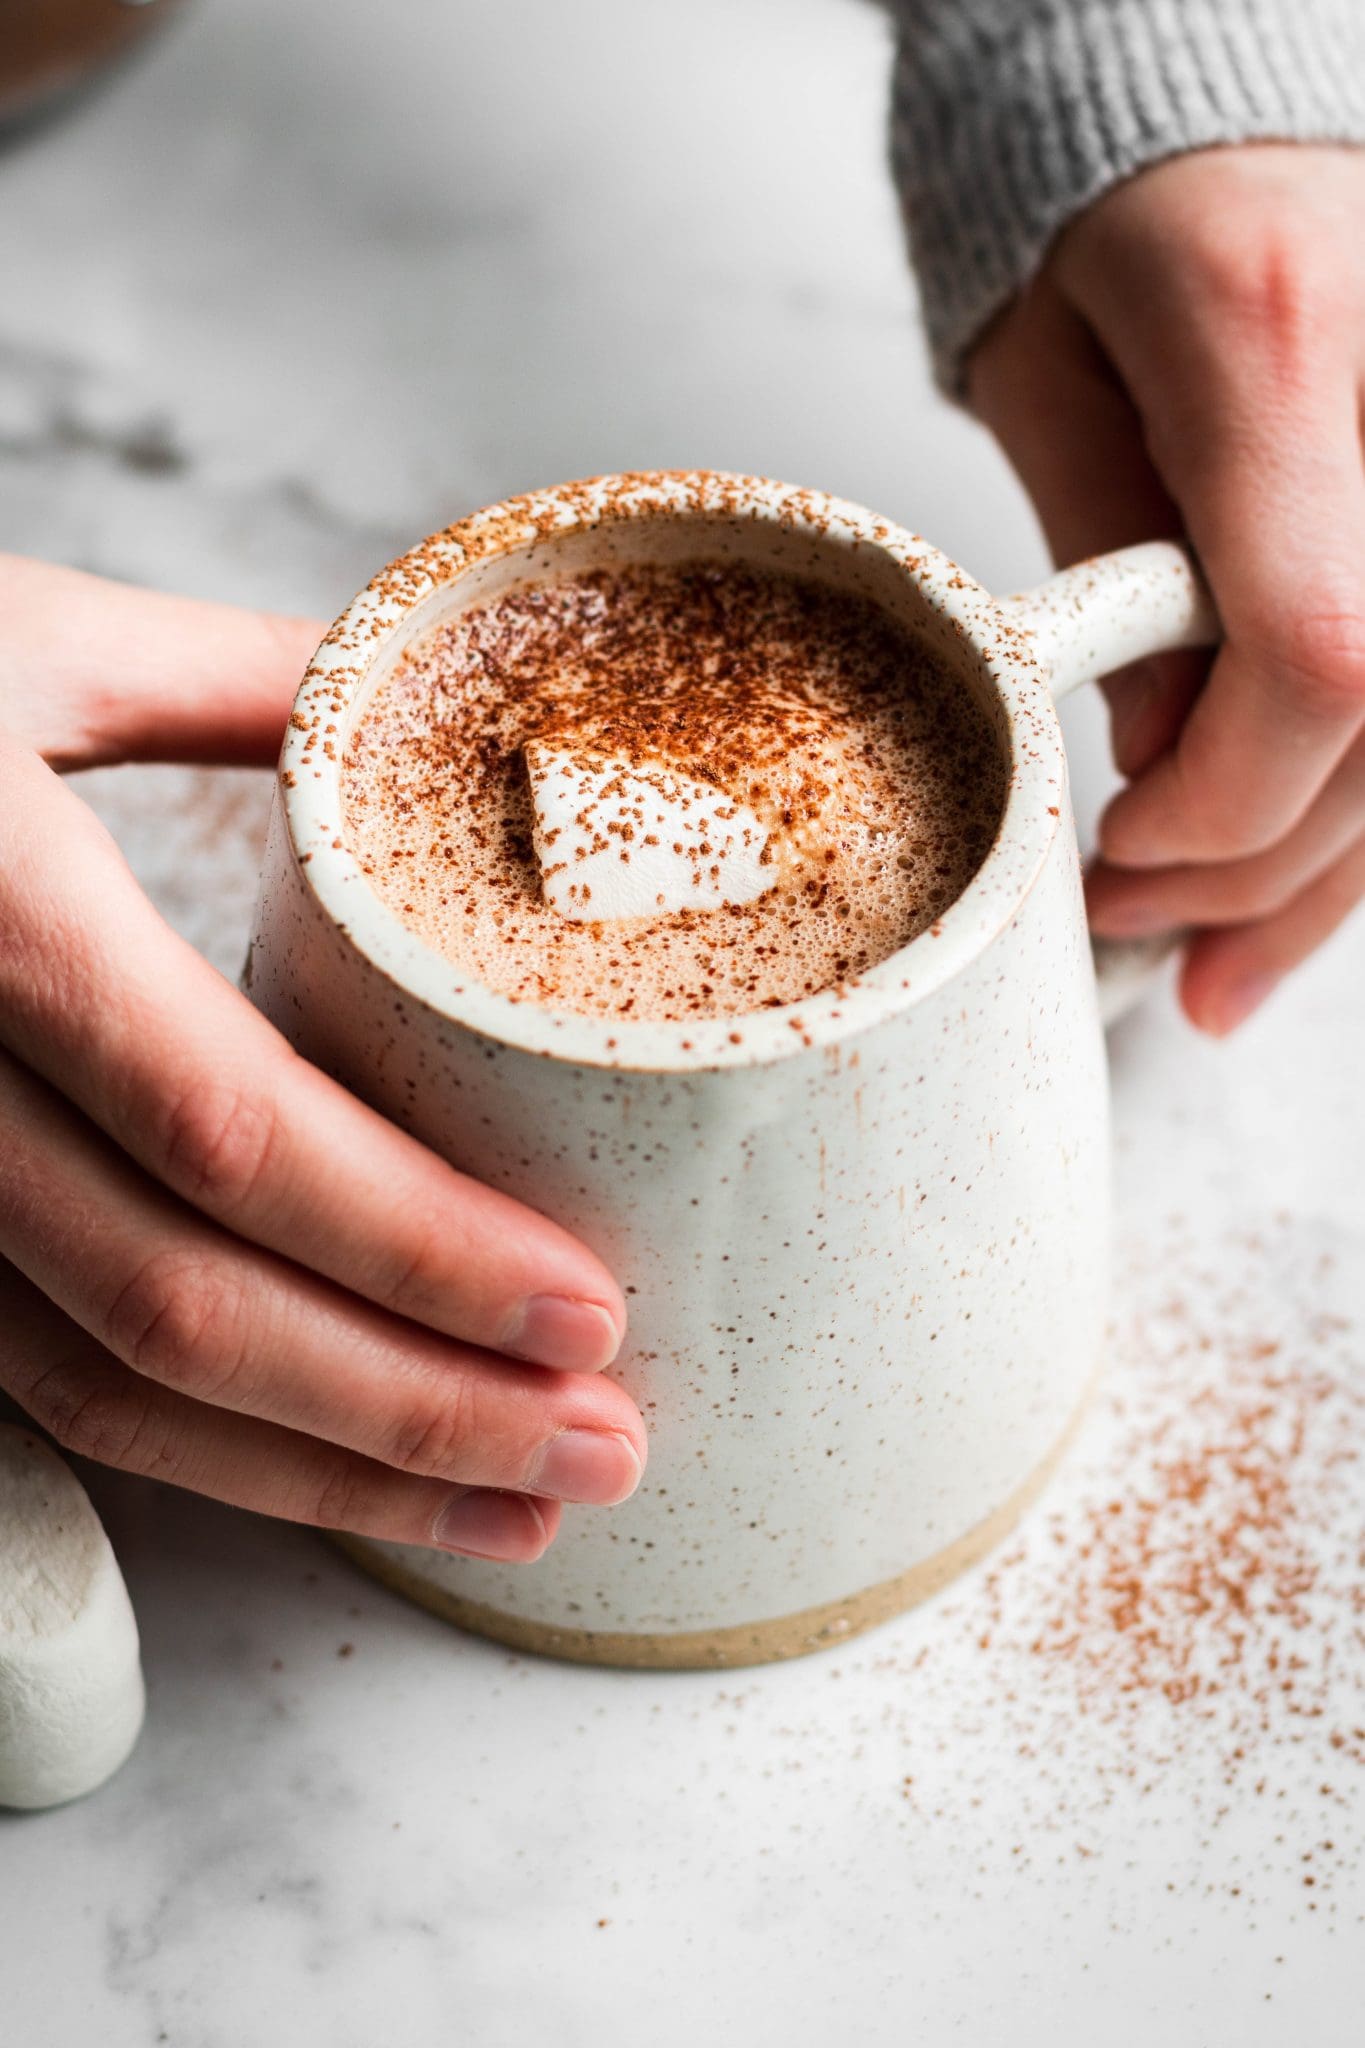 peanut butter hot cocoa - vegan recipes to start the new year